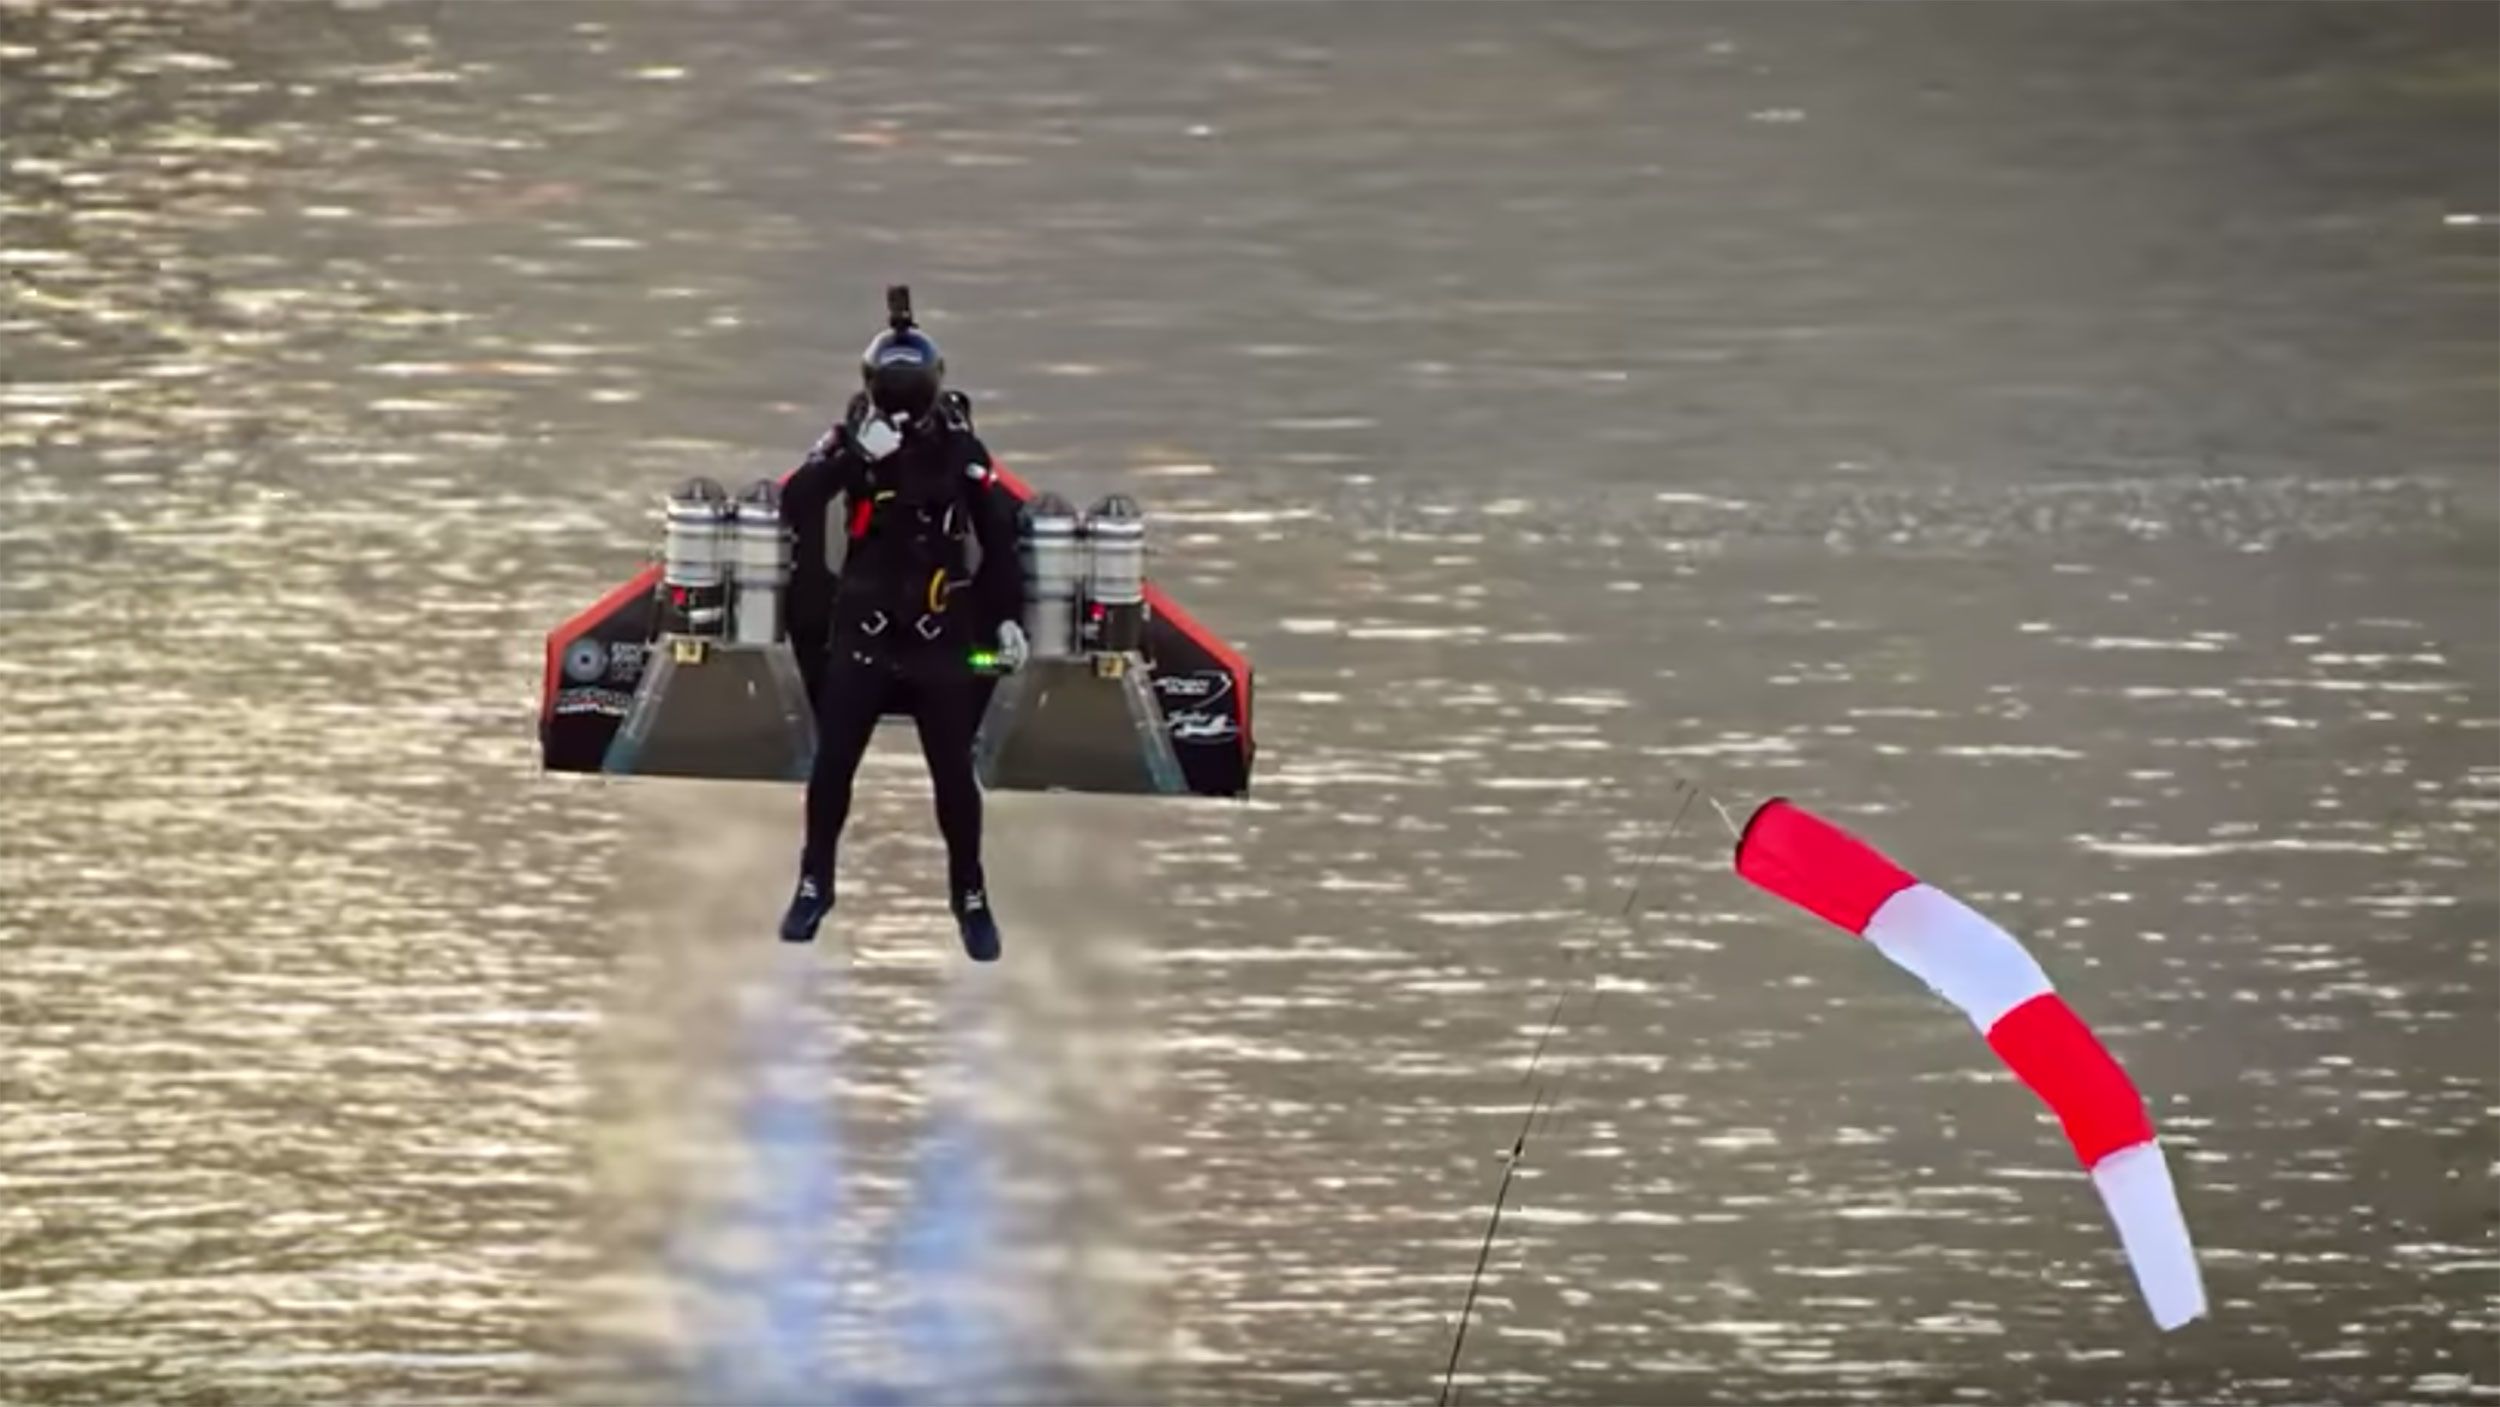 Here's what it's like to fly over Dubai with a jetpack